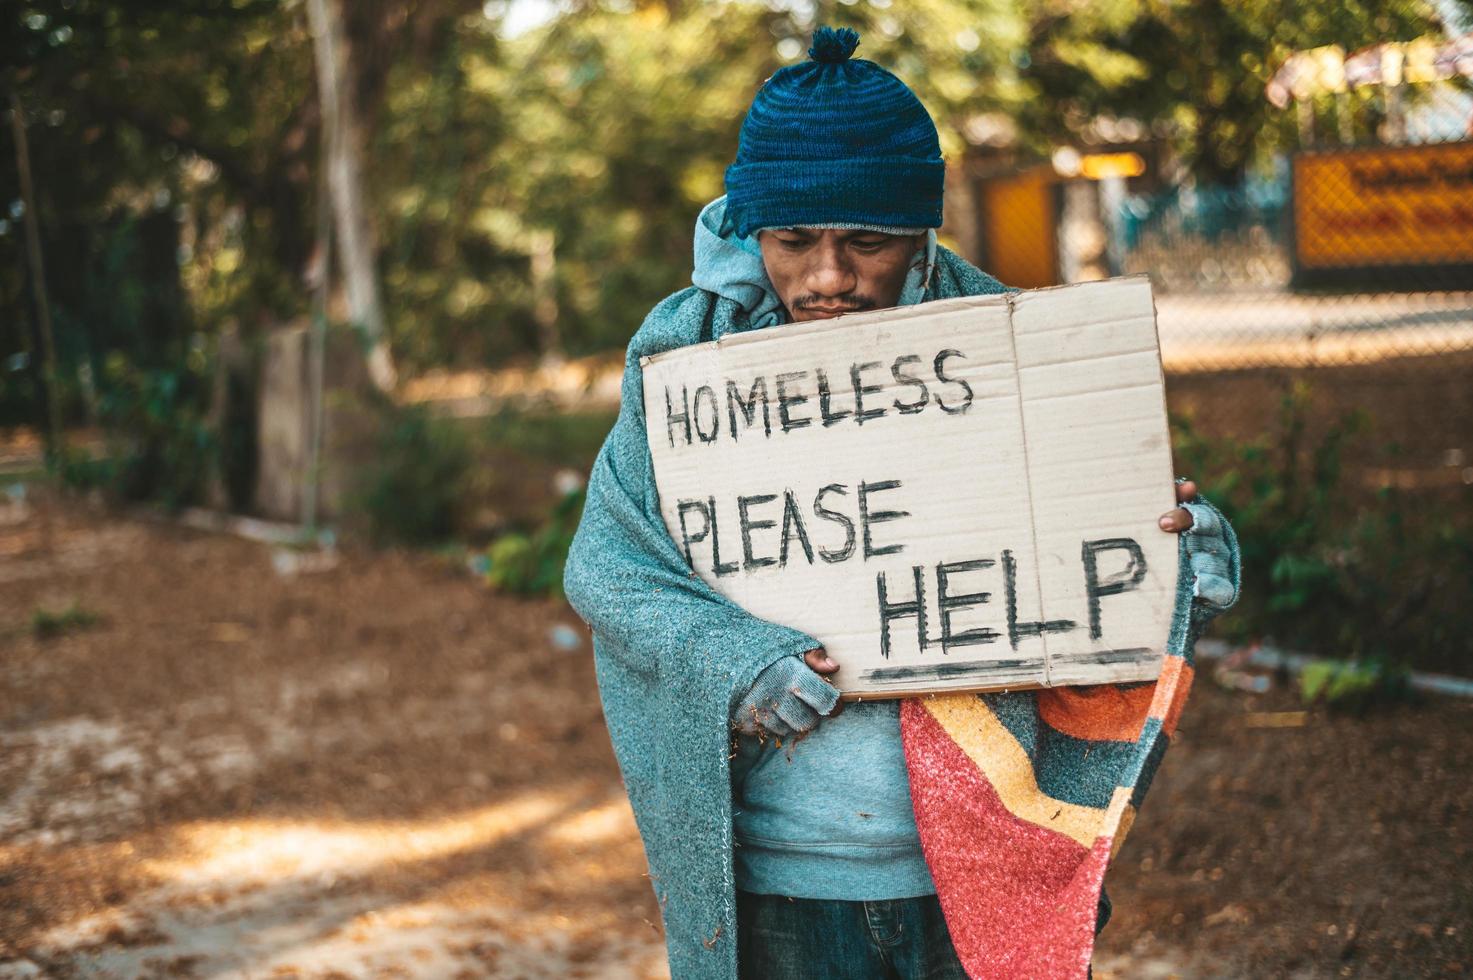 Beggar stands on the street with homeless messages please help photo